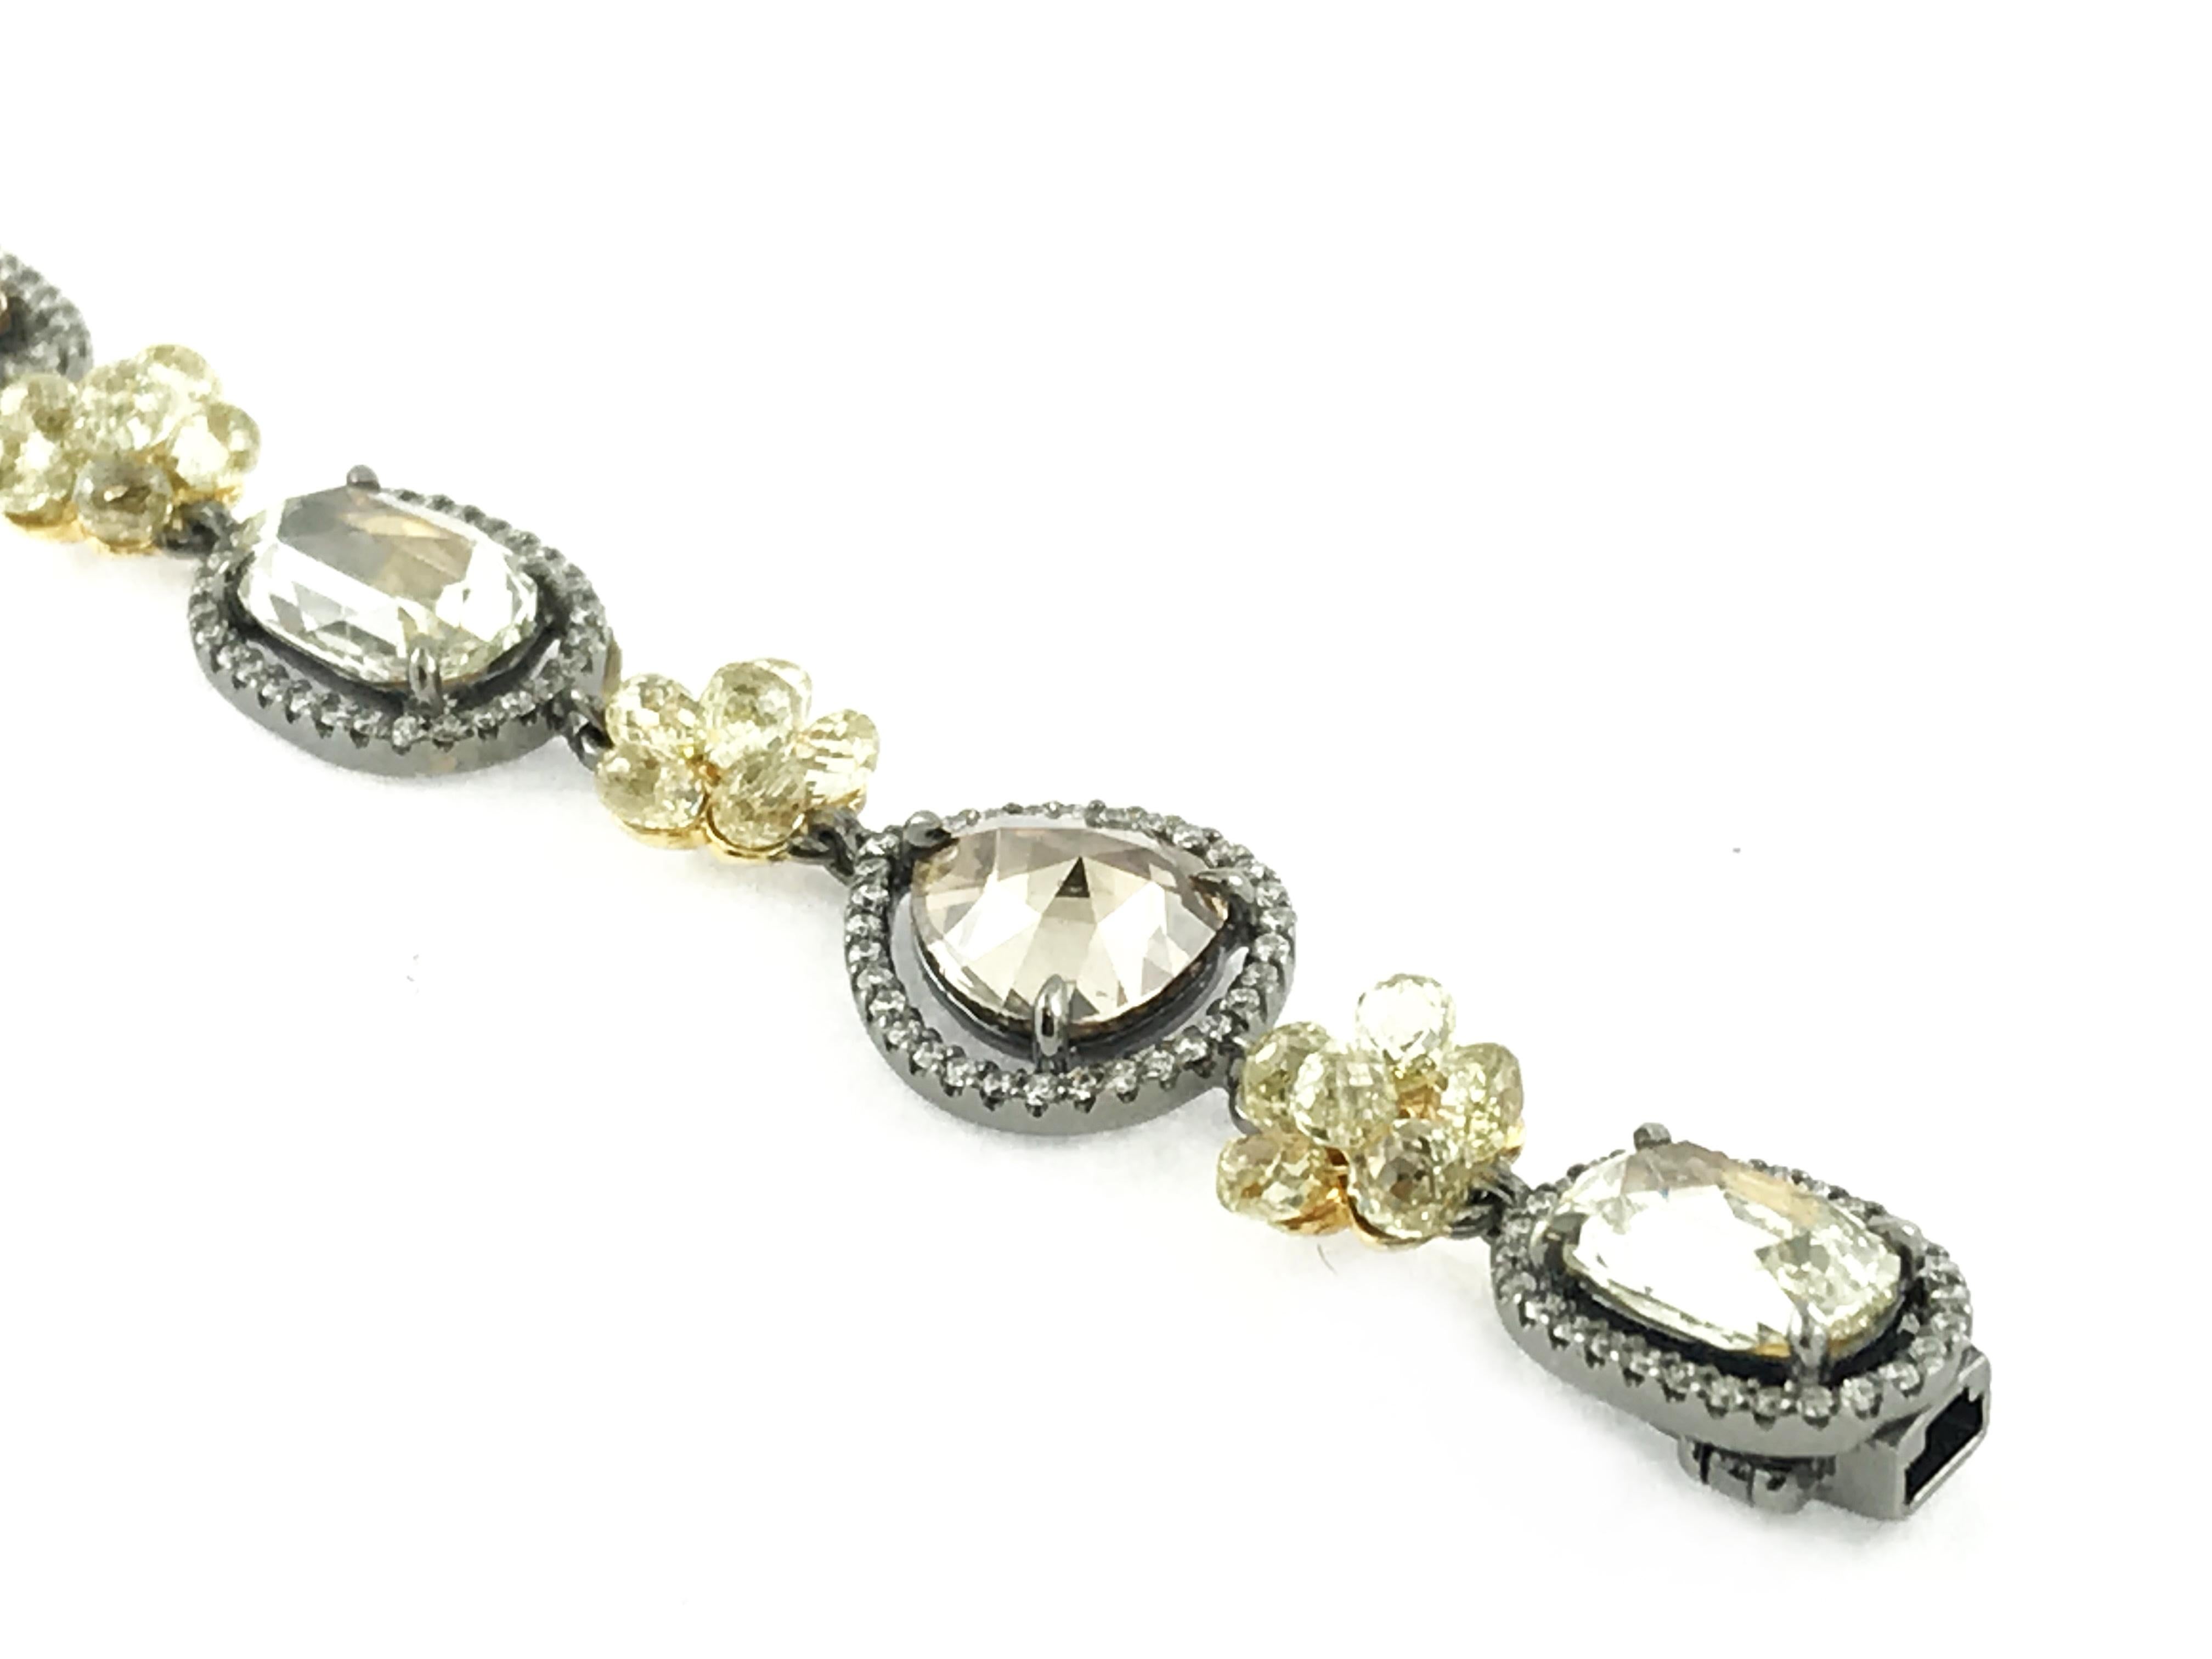 From our award winning COUTURE line. Designed by Samir Bhansali, this one-of a kind bracelet features a beautiful combination of brilliant cut round diamonds (0.77cts), fancy yellow diamonds beads (5.89cts) , yellow rose cut diamonds (2.98cts) and